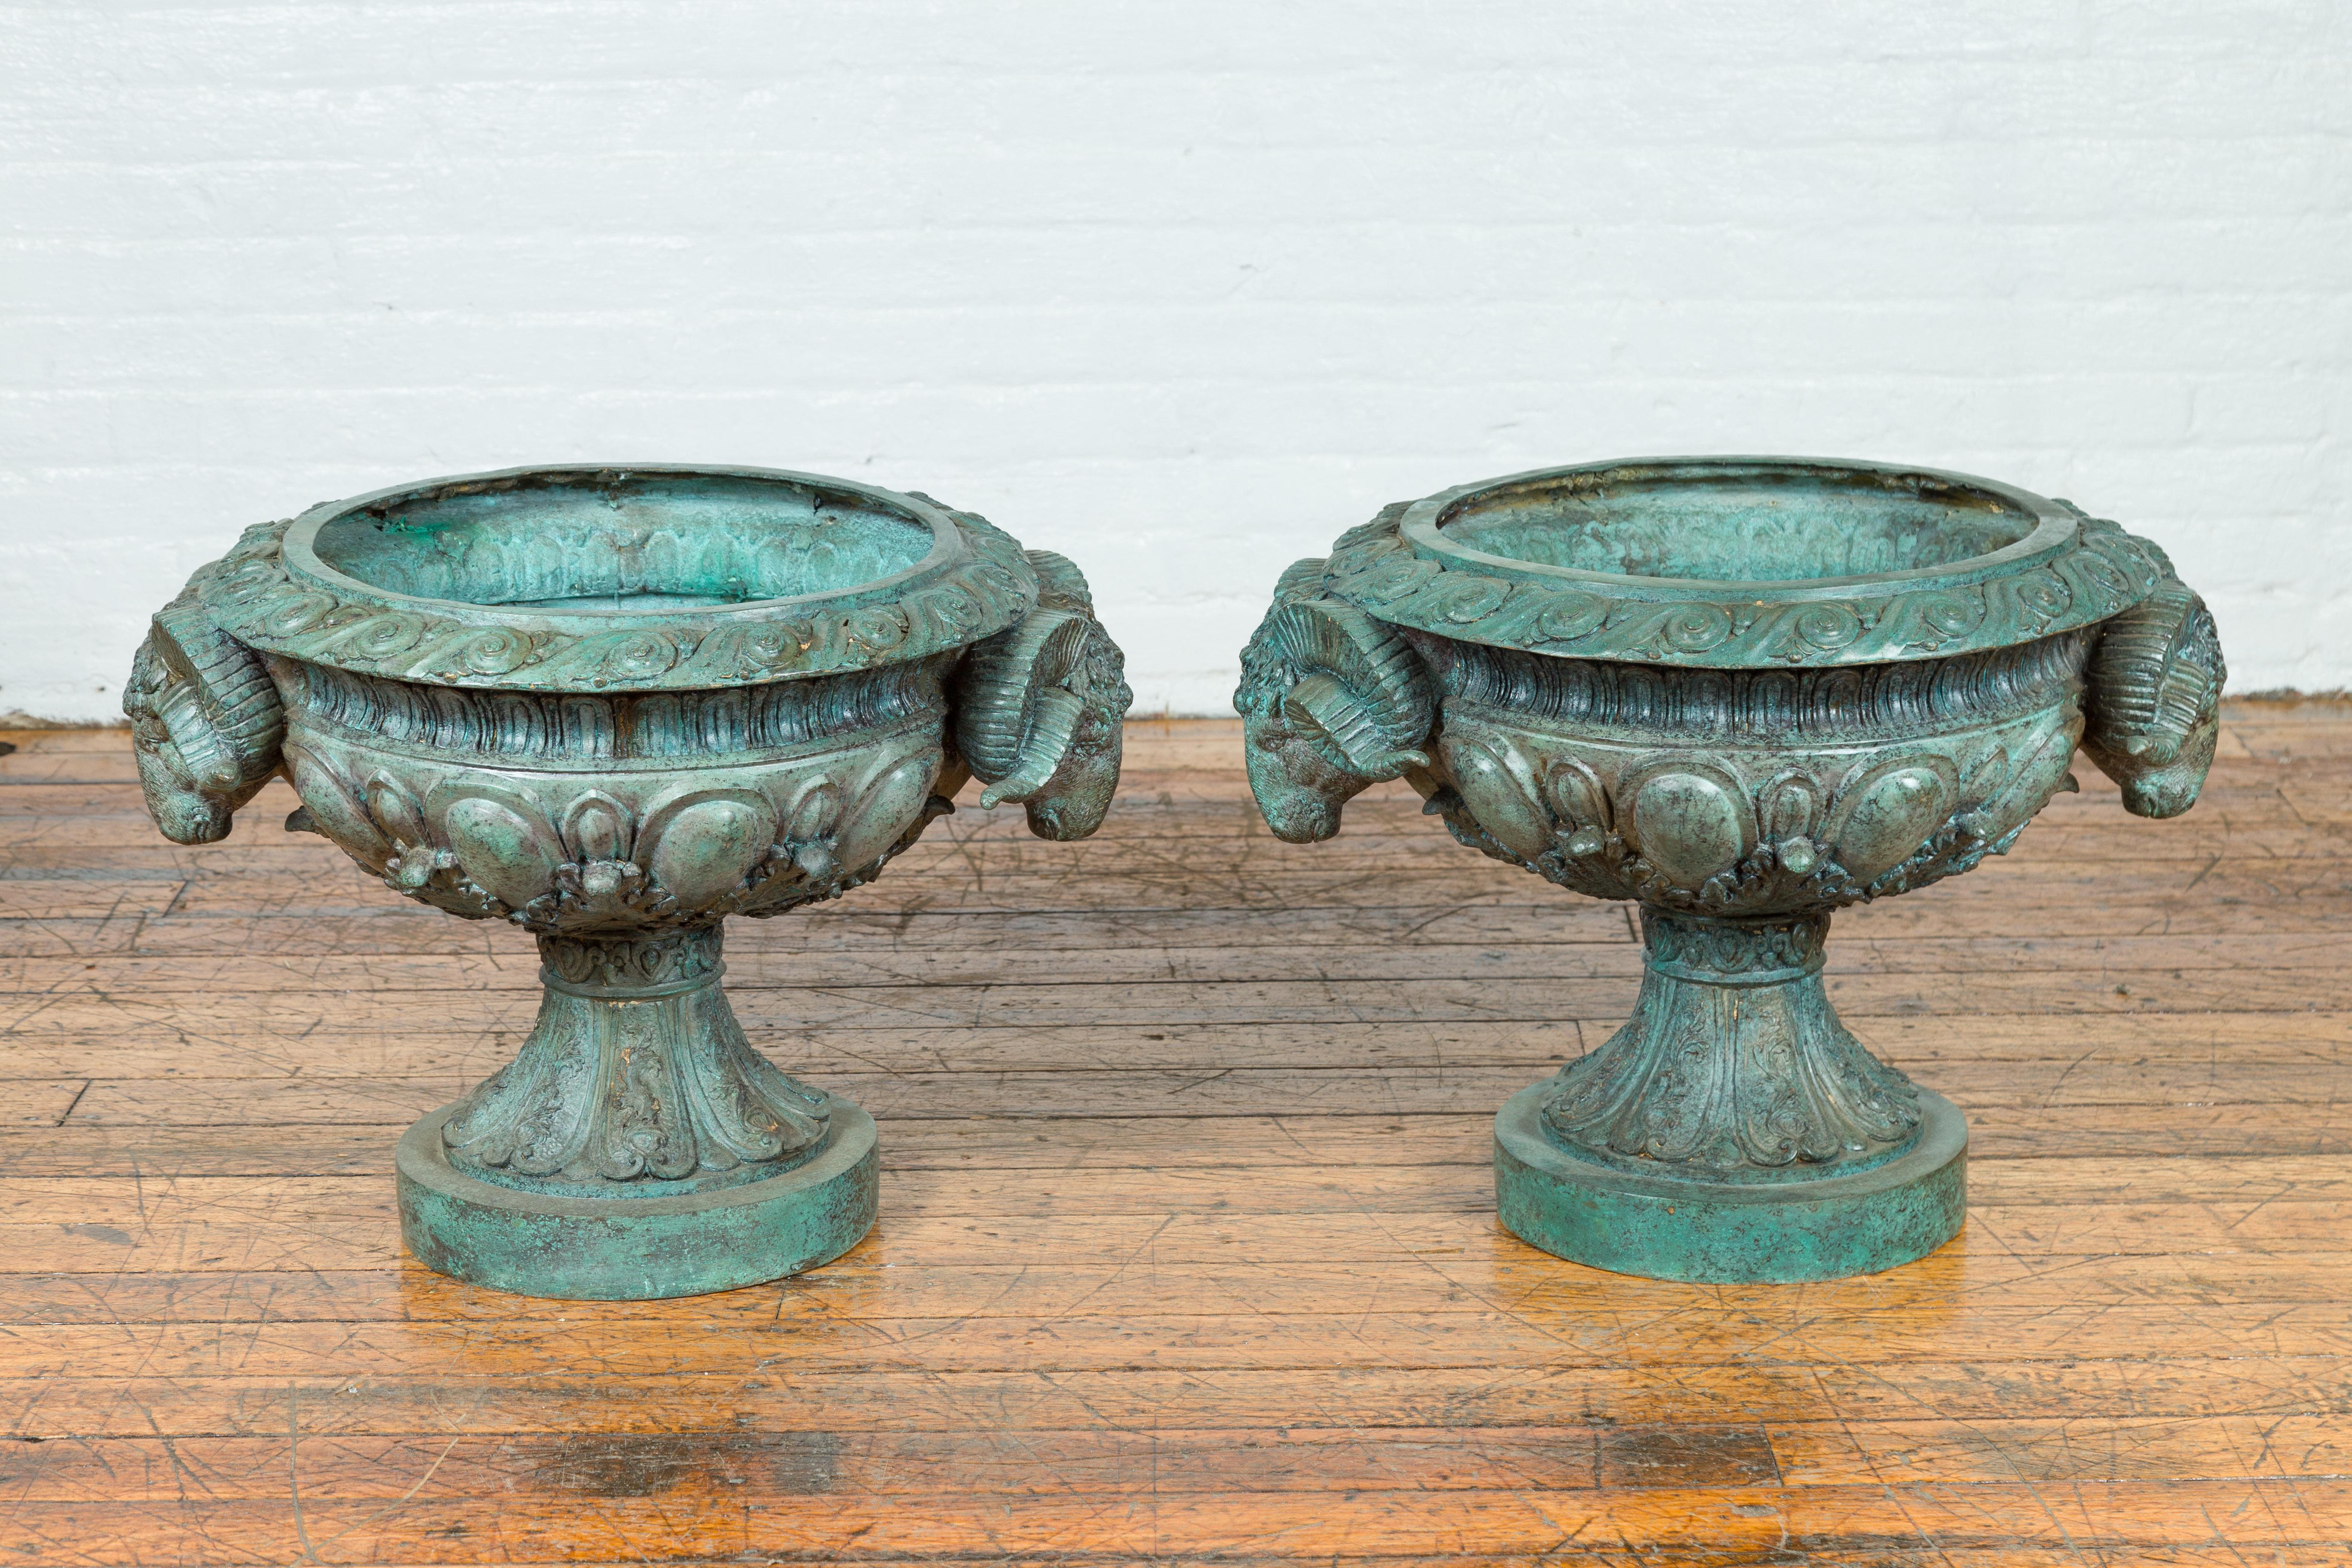 Greco Roman Style Vintage Verde Patina Bronze Urns with Rams' Heads, Sold Each 10